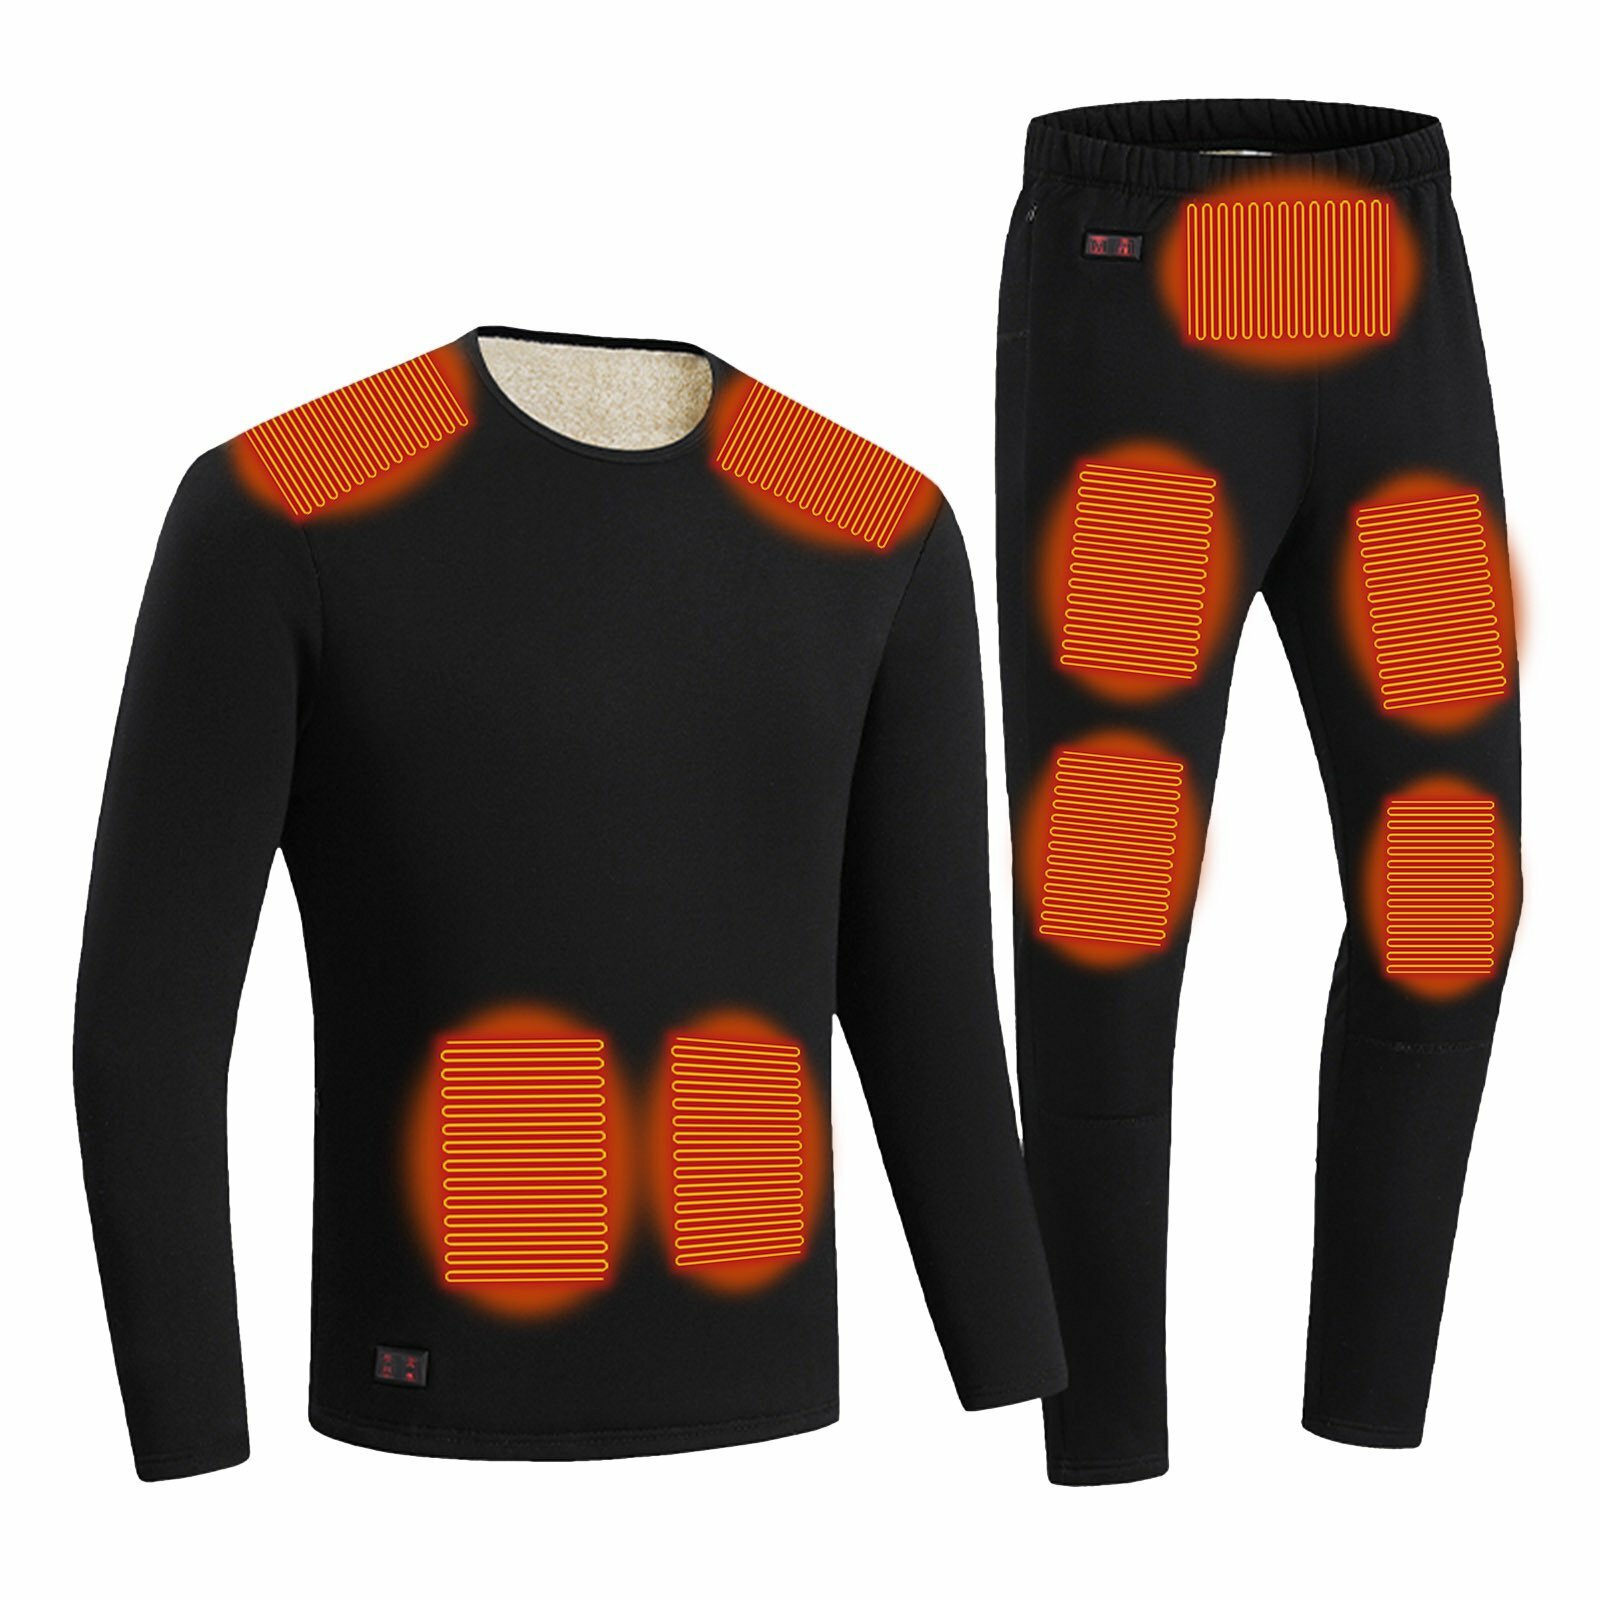 

Outdoor Warm Clothing Heated for Riding Skiing Fishing Charging Via Heated Thermal Underwear Set